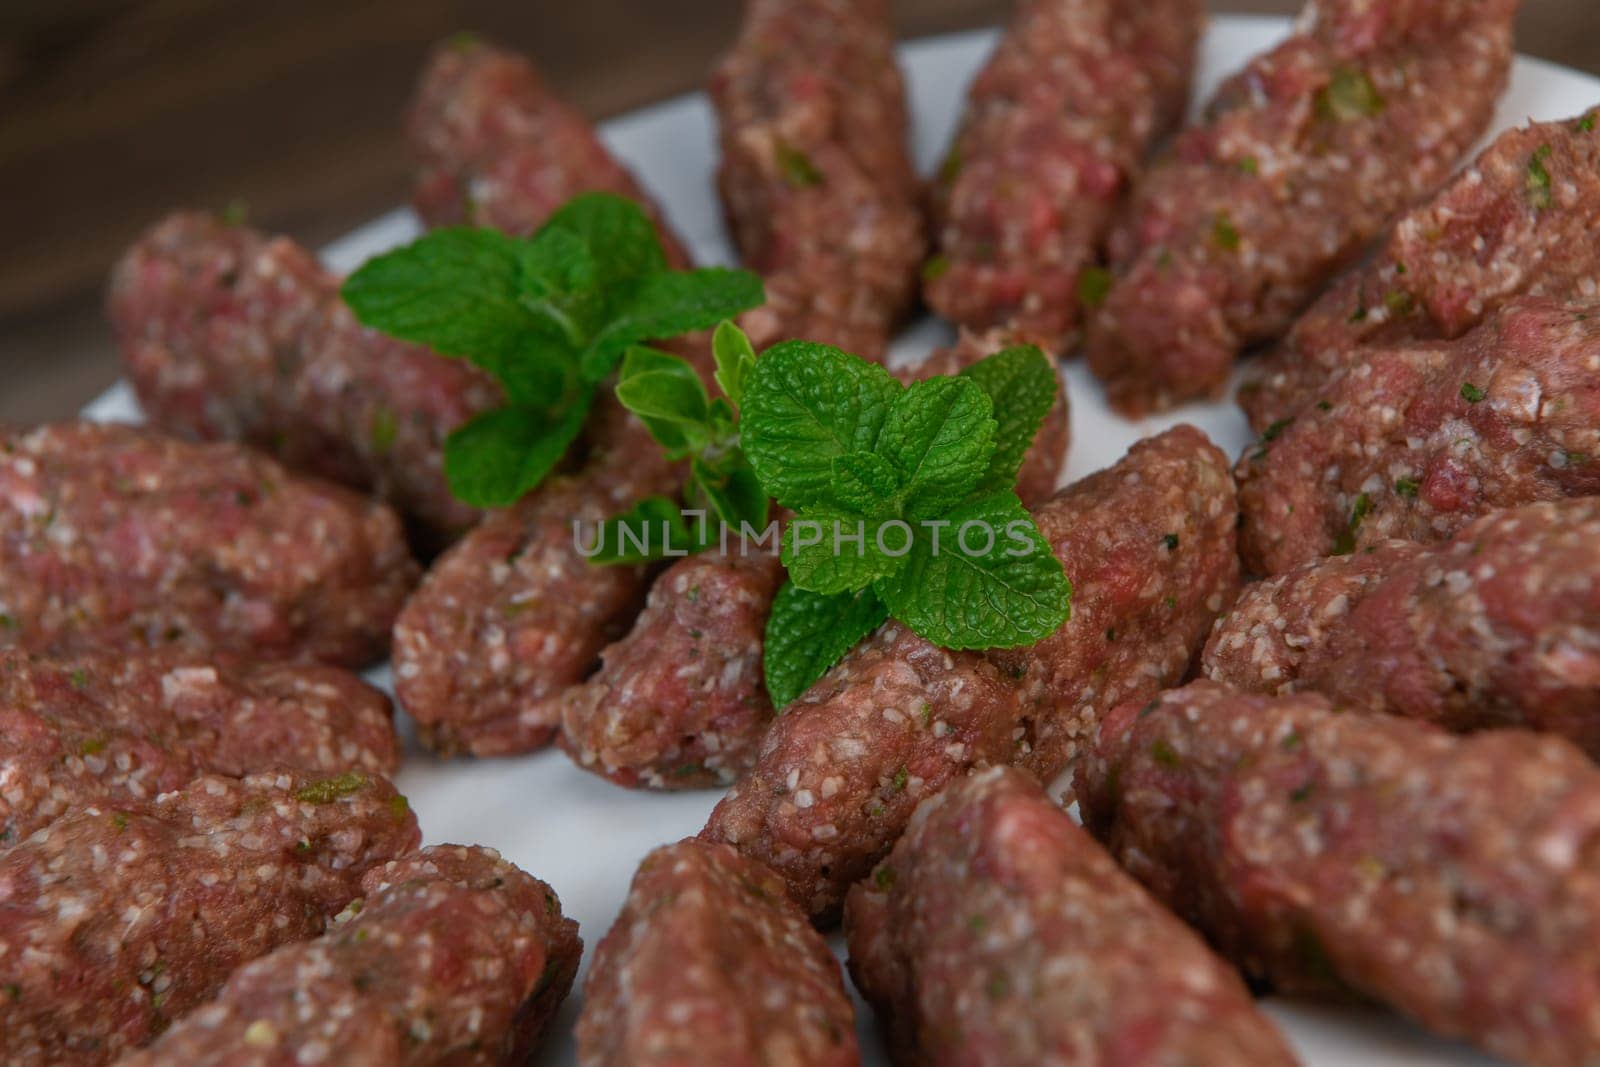 RECIPE FOR LEBANESE KEBBE NAYYHE, RAW MINCED BEEF, MARJORAM, MINT, ONIONS, CRUSHED WHEAT, SEVEN SPICES, CINNAMON, CAYENNE PEPPER by FreeProd